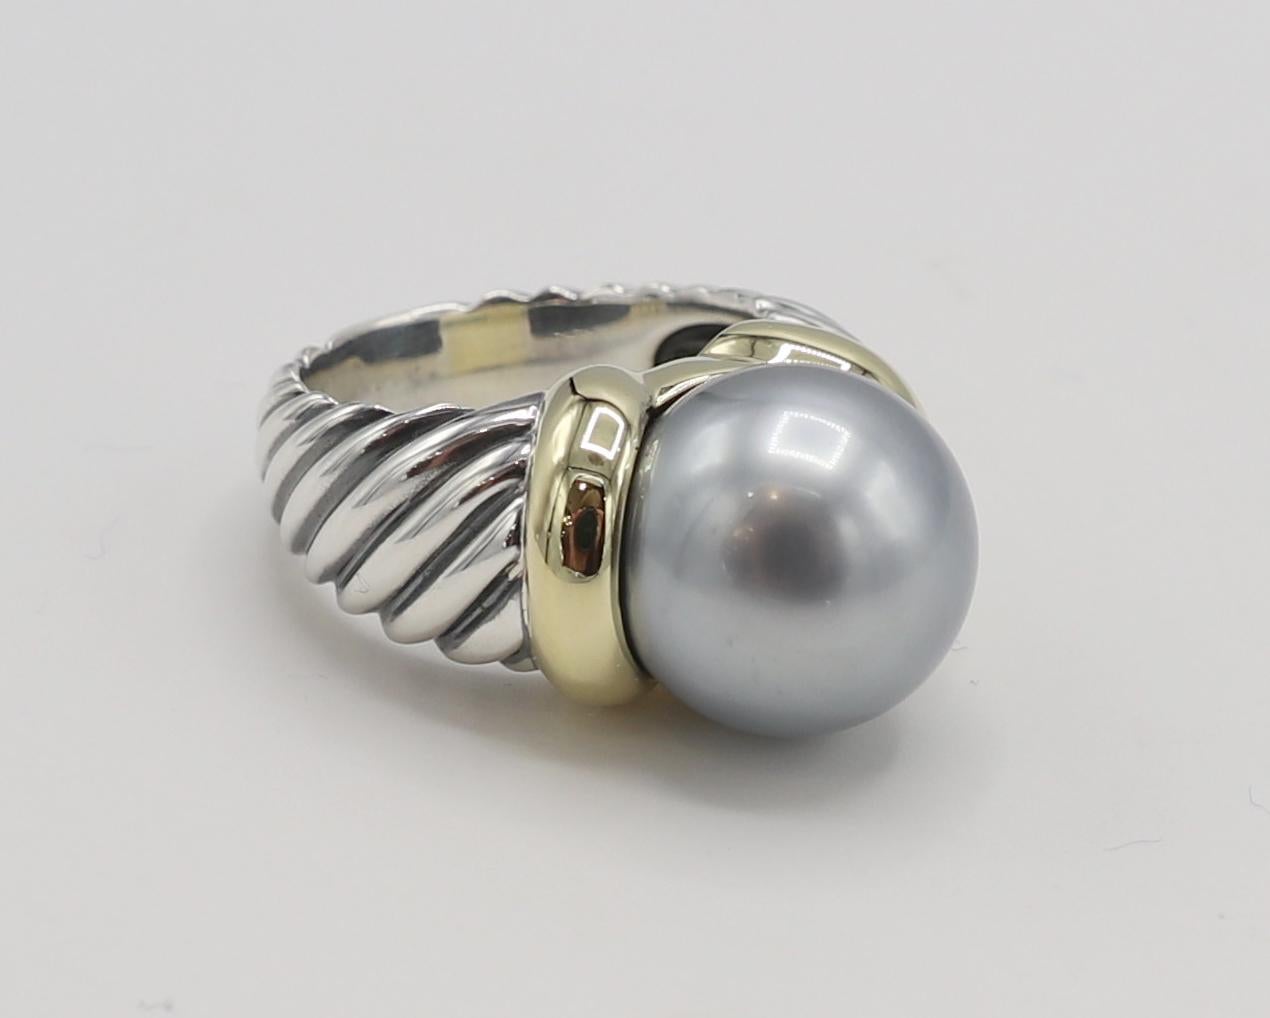 David Yurman Sterling Silver & Gold Black Pearl Cable Ring 
Metal: Sterling silver & 18k yellow gold
Size: 6.75 (US)
Pearl: 13.5mm
Weight: 16.43 grams

